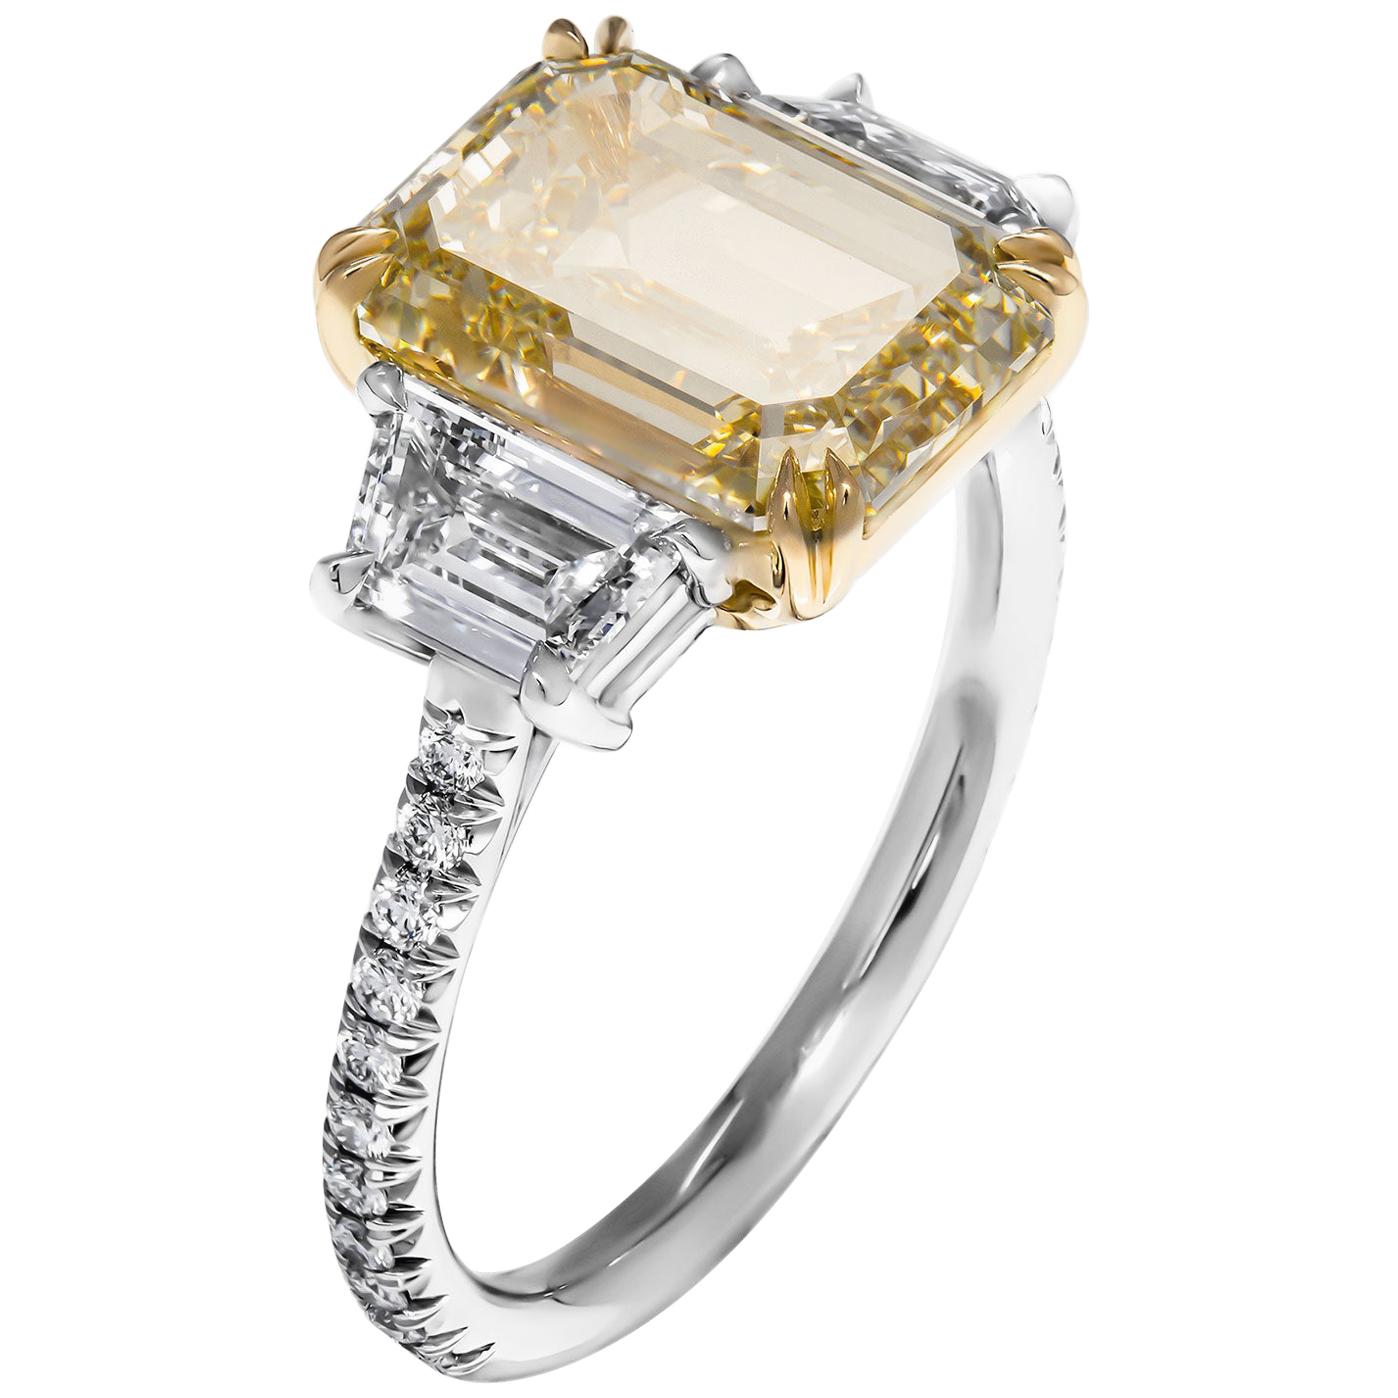 Mounted in handmade custom design setting featuring Platinum 950 & 18K Yellow Gold, diamonds on the shank and basket under each stone, a true piece of art

Setting features exceptional pave work, delicate yet sturdy, includes approximately 0.26ct